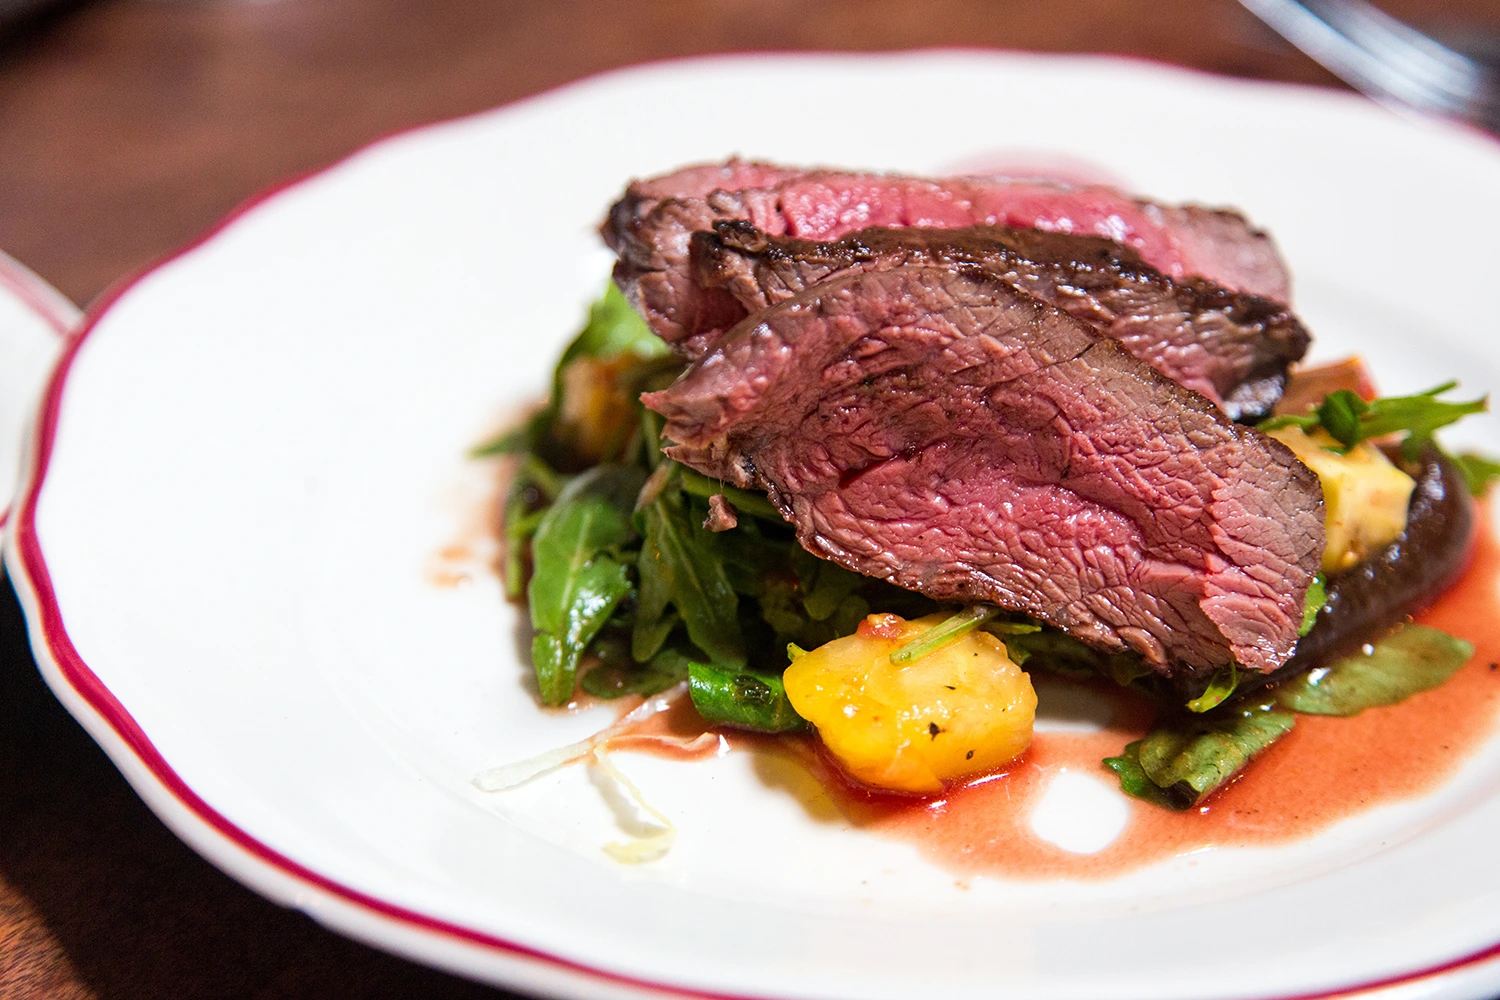 A plate with steak and vegetables on it. As the cost of beef rises, consider what to do to manage your restaurant's fluctuating ingredient costs.